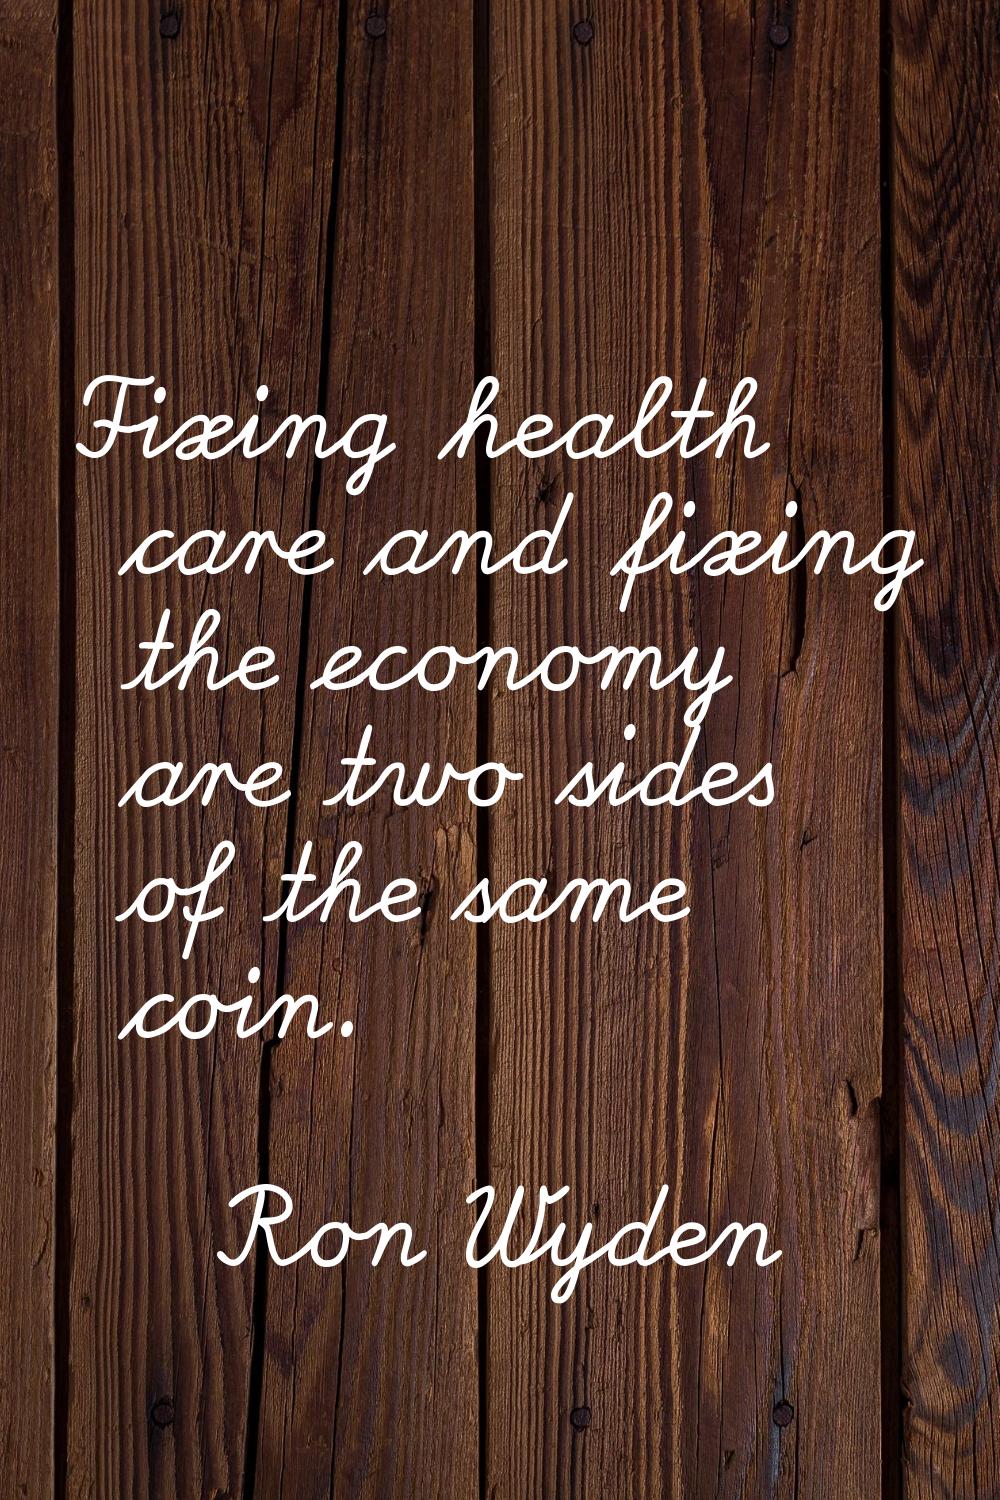 Fixing health care and fixing the economy are two sides of the same coin.